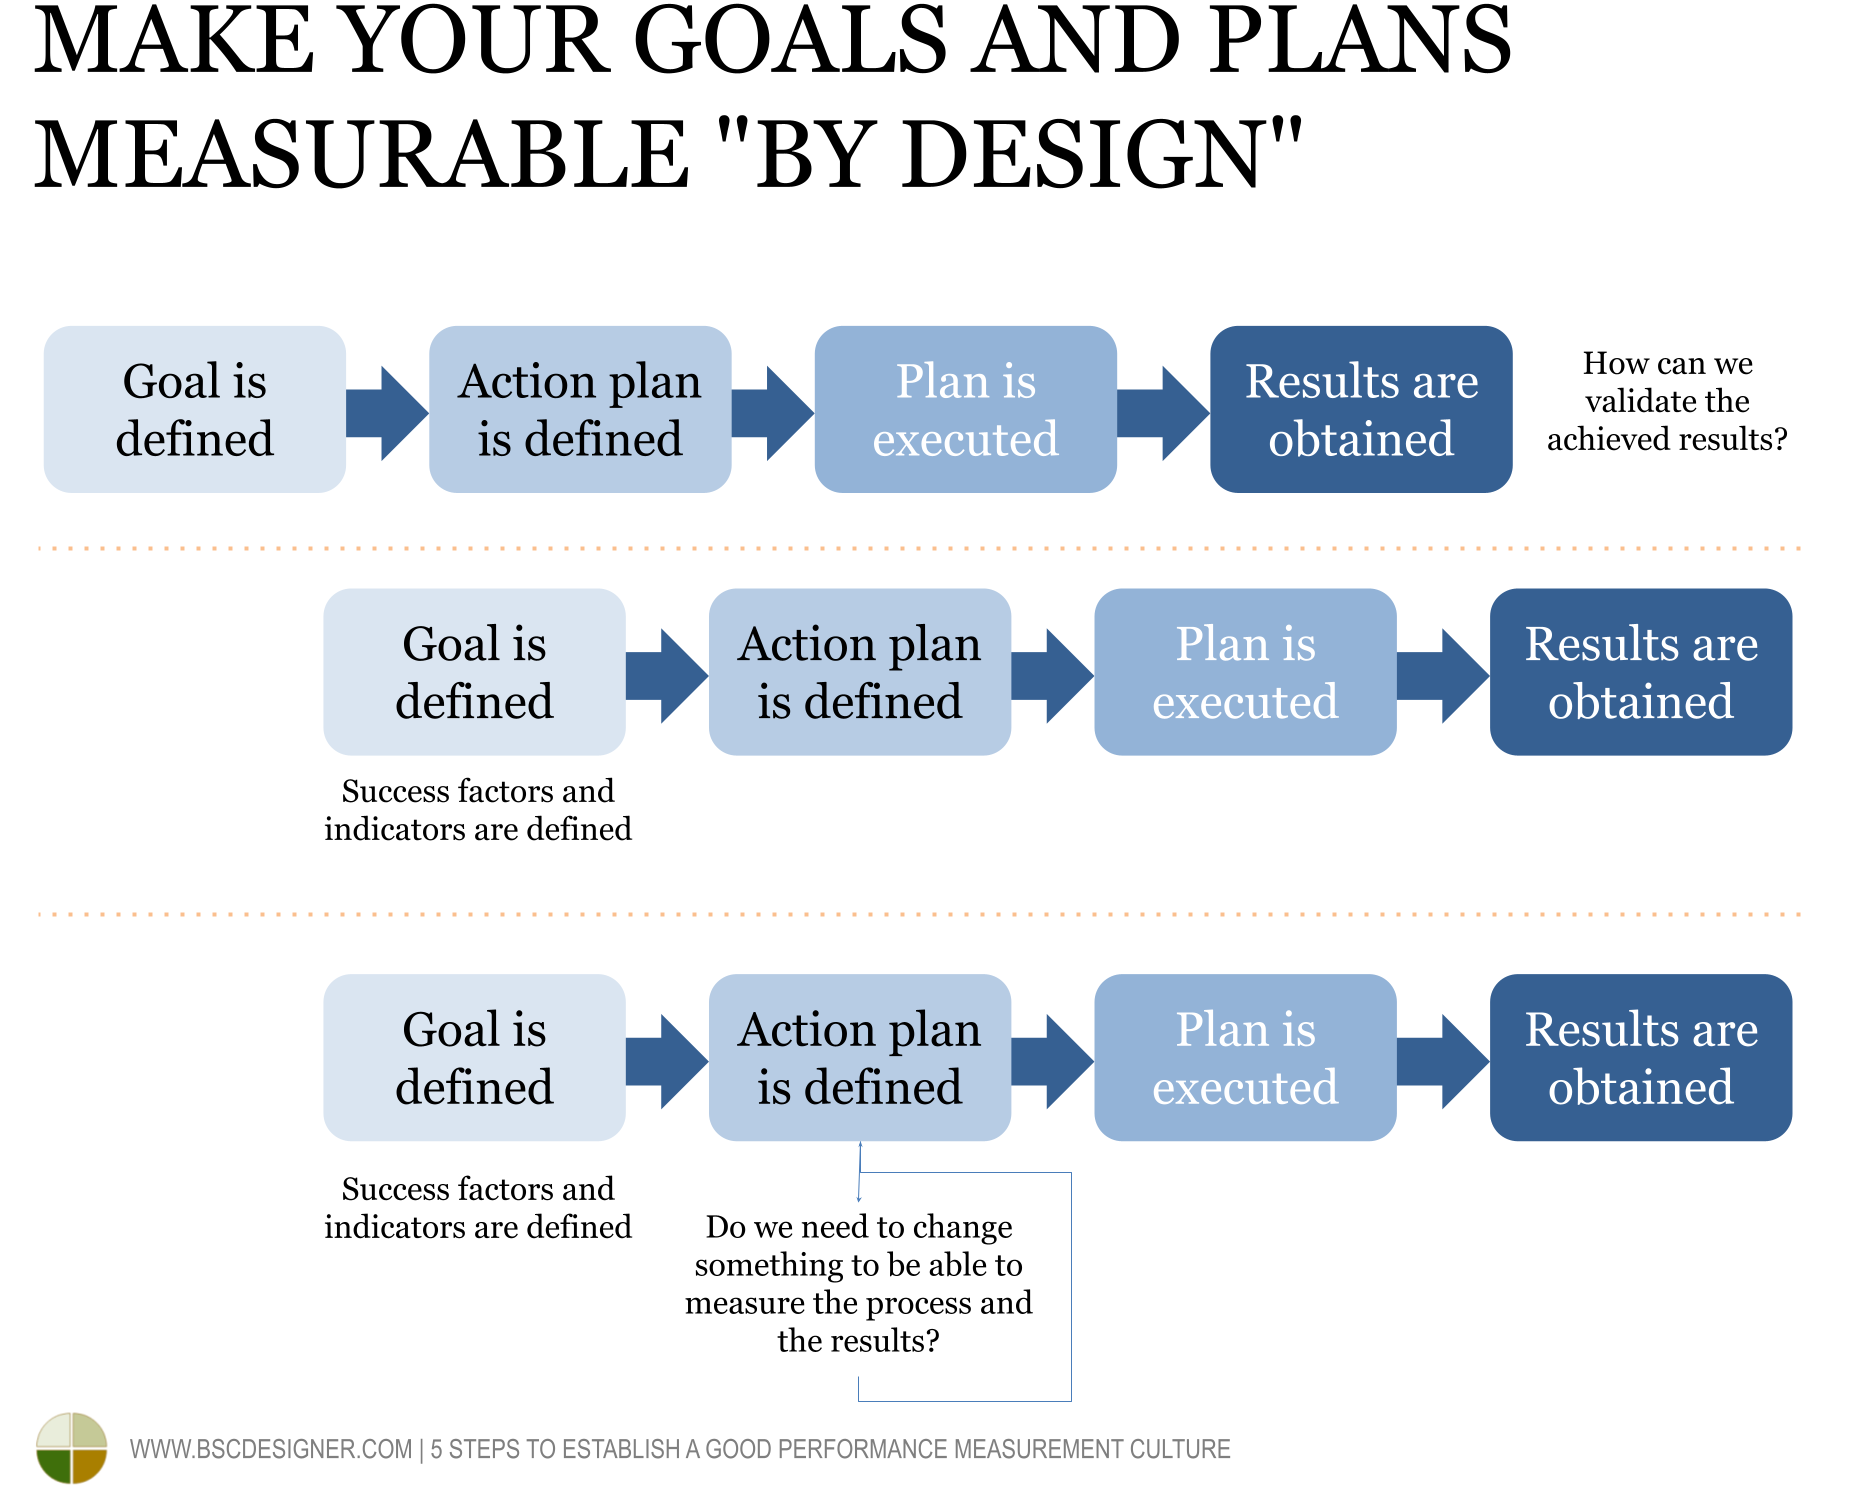 From just a process to the processes and goals measured by design